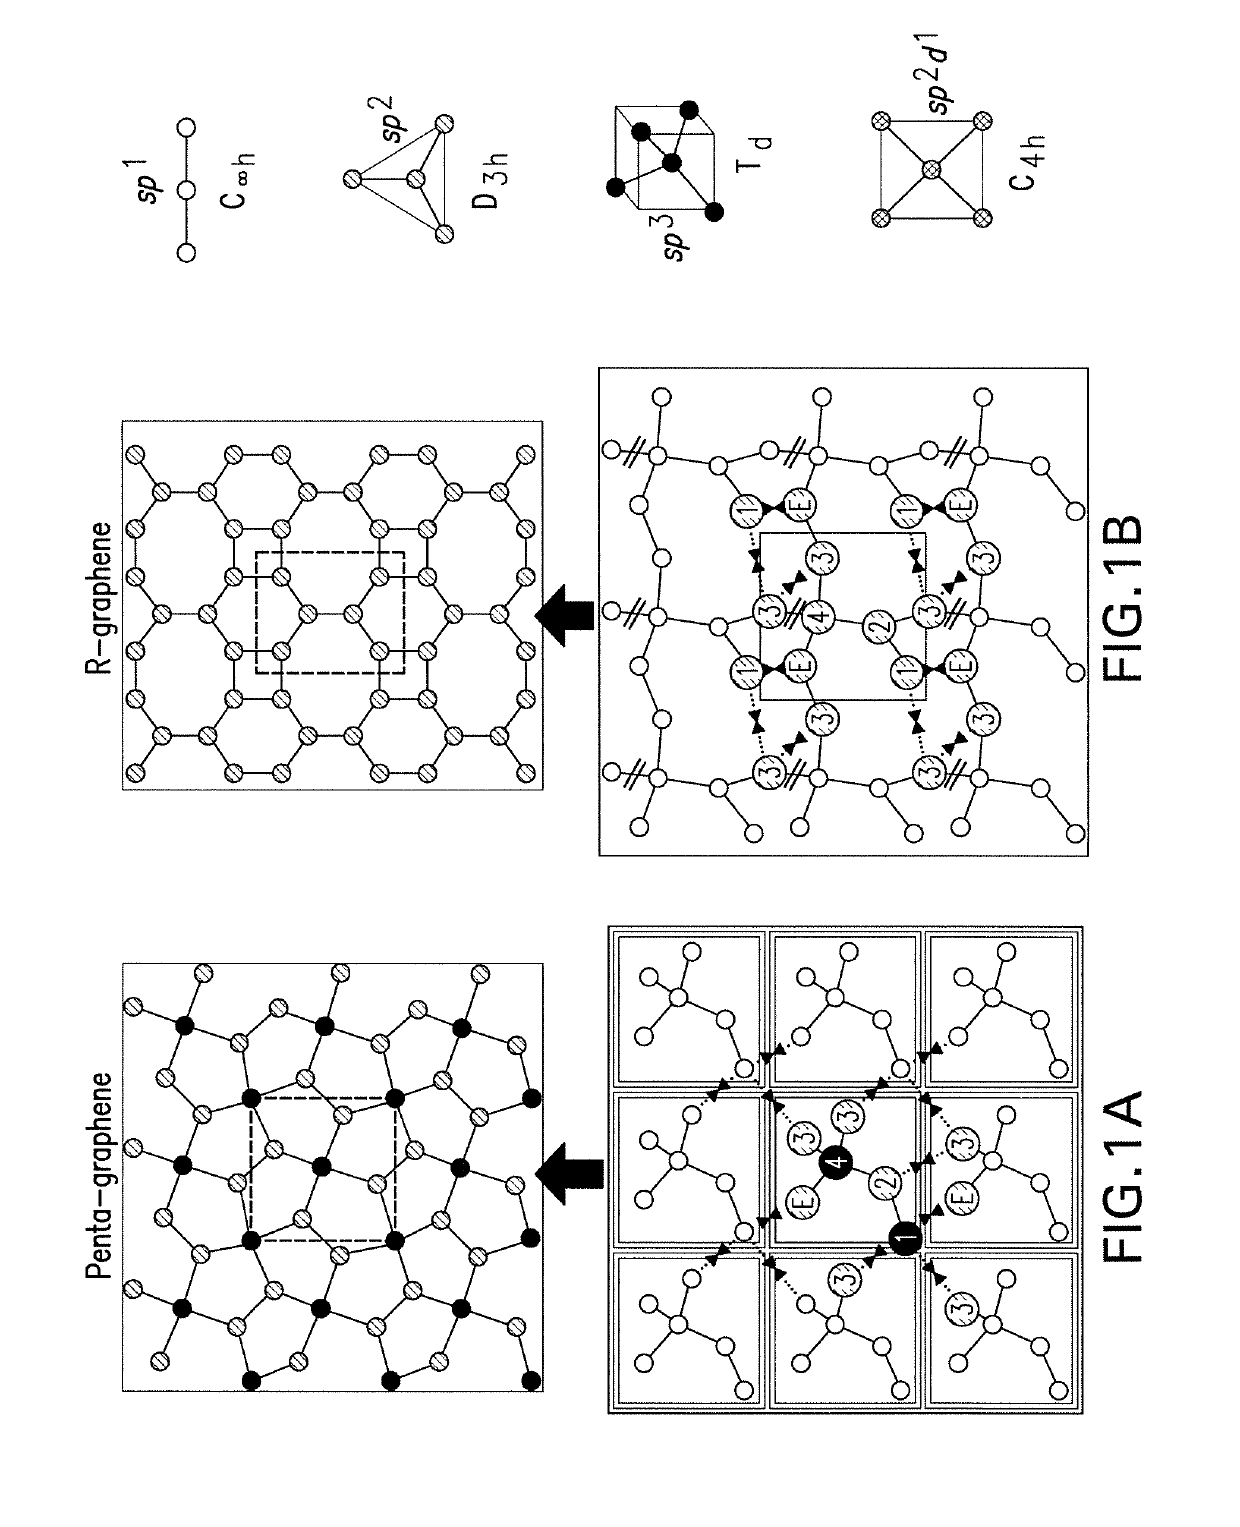 Recipe for the synthesis of metastable structures using topologically assembled precursors